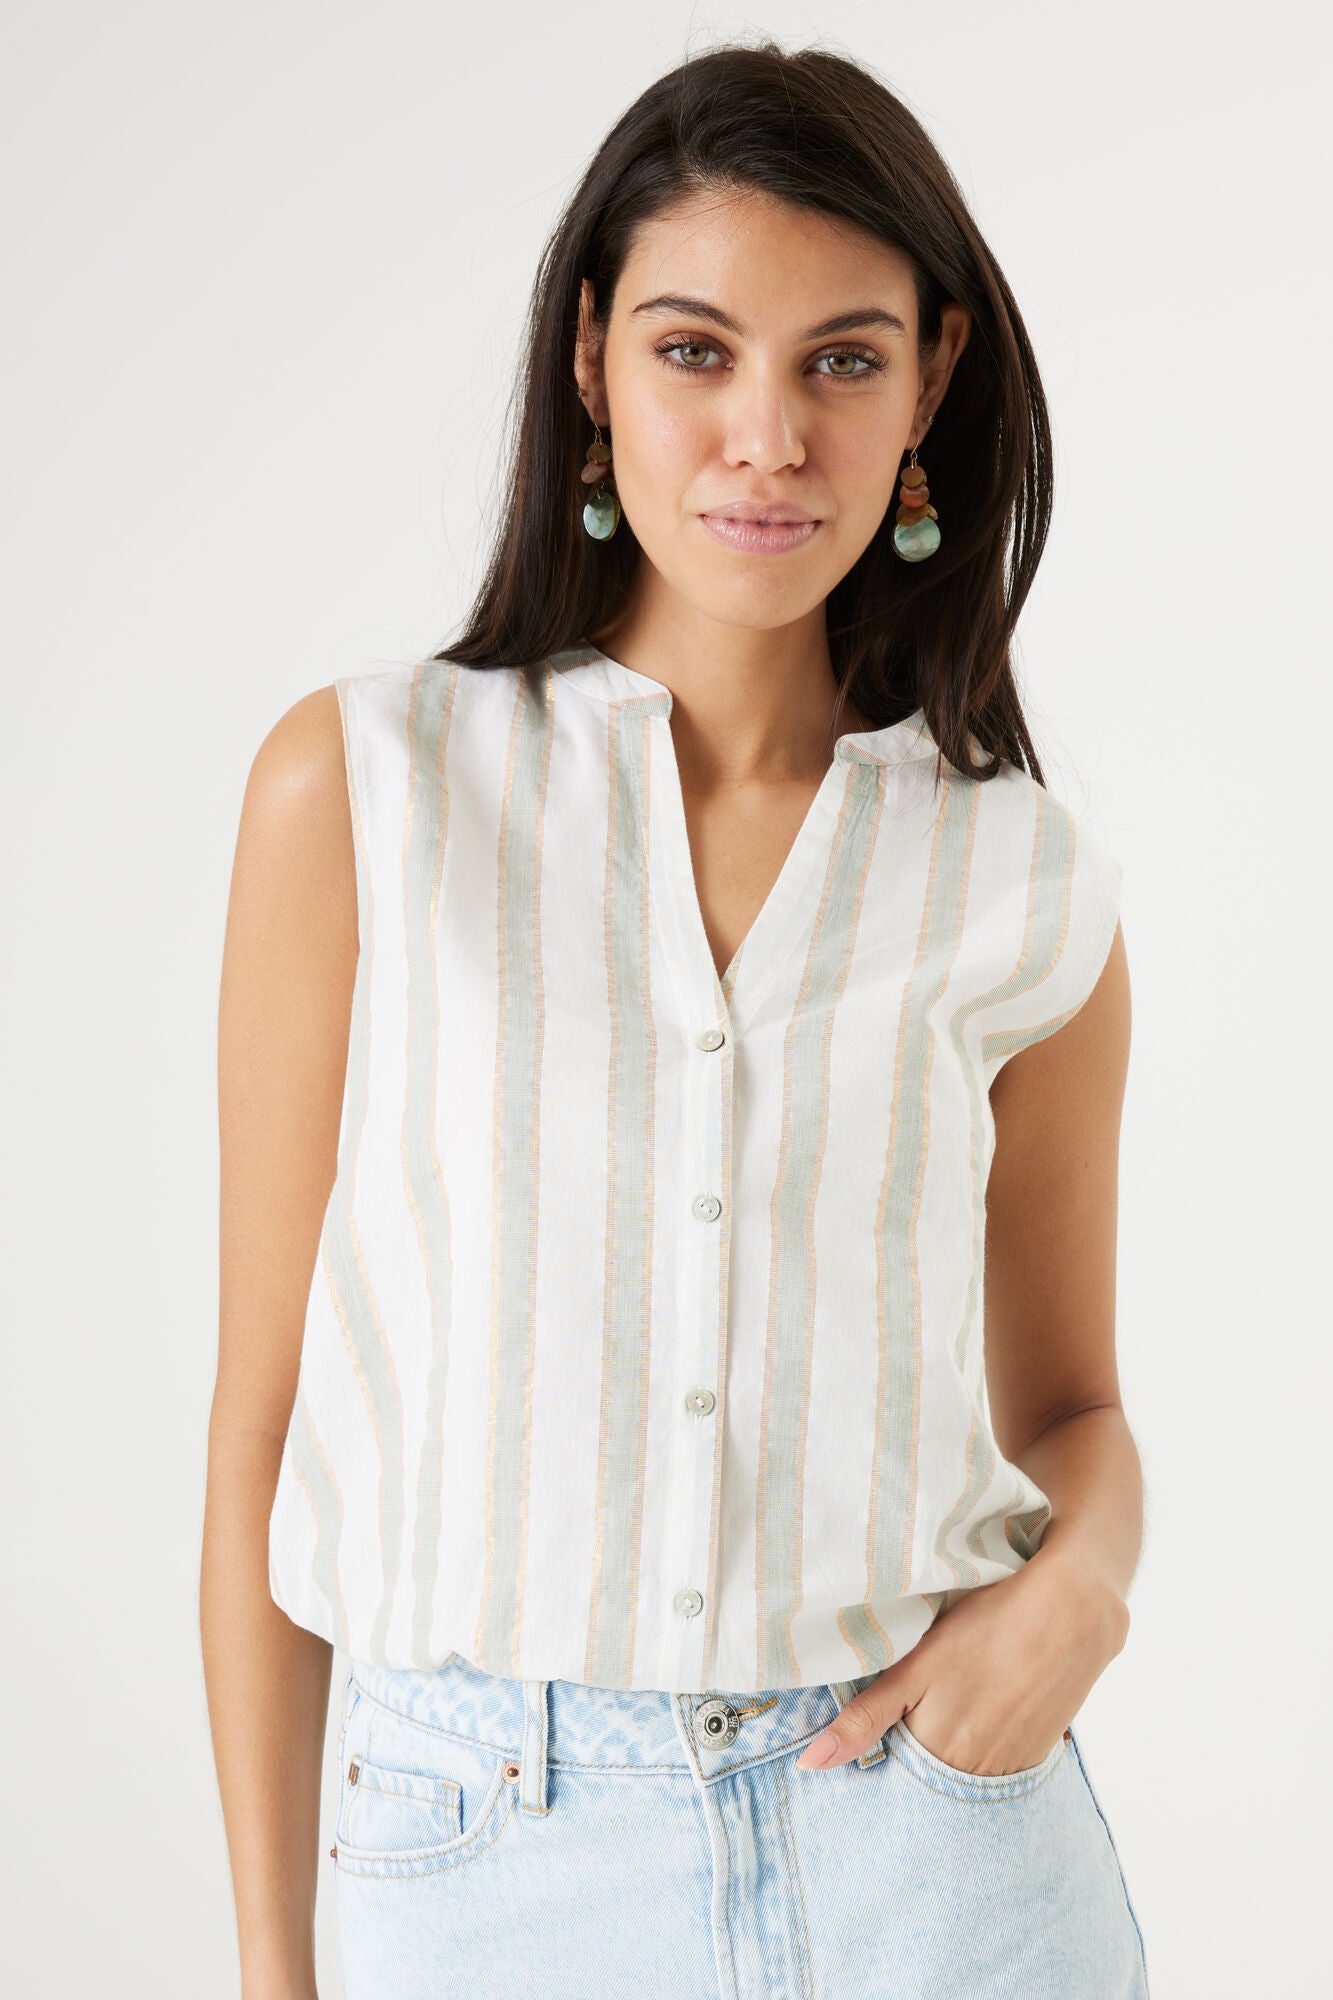 Garcia (Q40033) Women's Sleeveless Button Up Blouse with Tie Waist and Split V-neck in Cream, Pastel Green and Golden Lurex Stripes